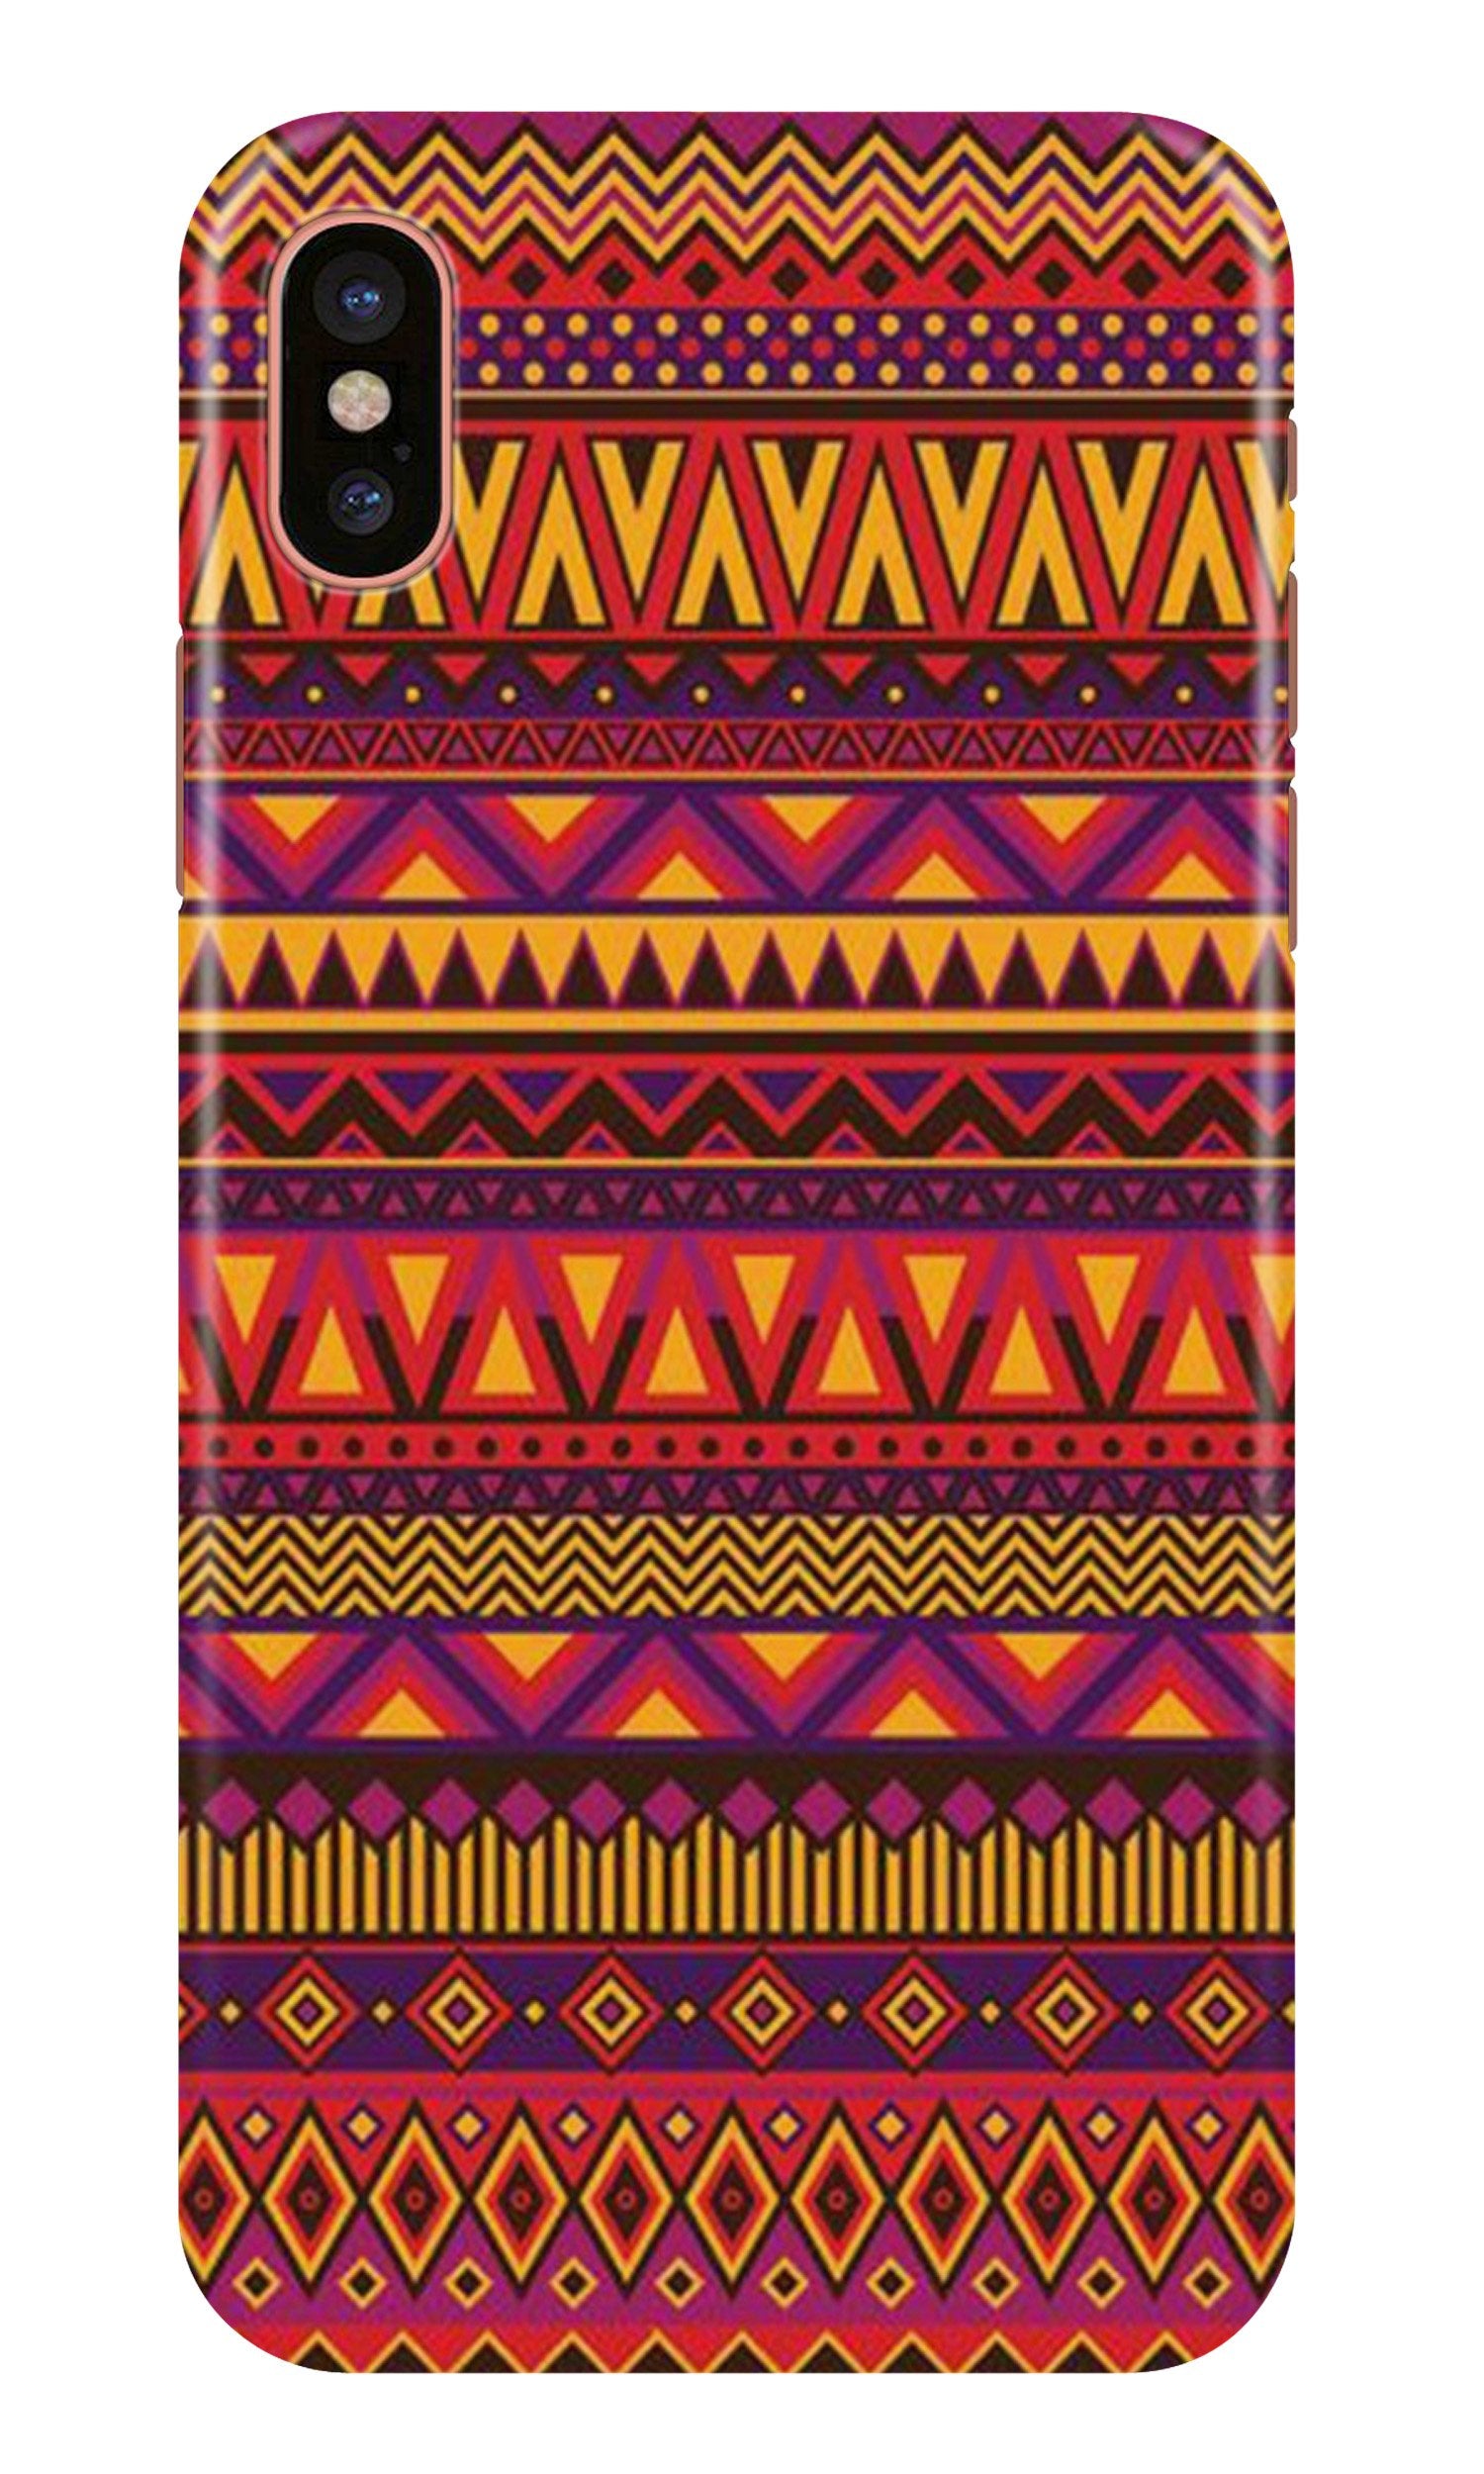 Zigzag line pattern2 Case for iPhone X